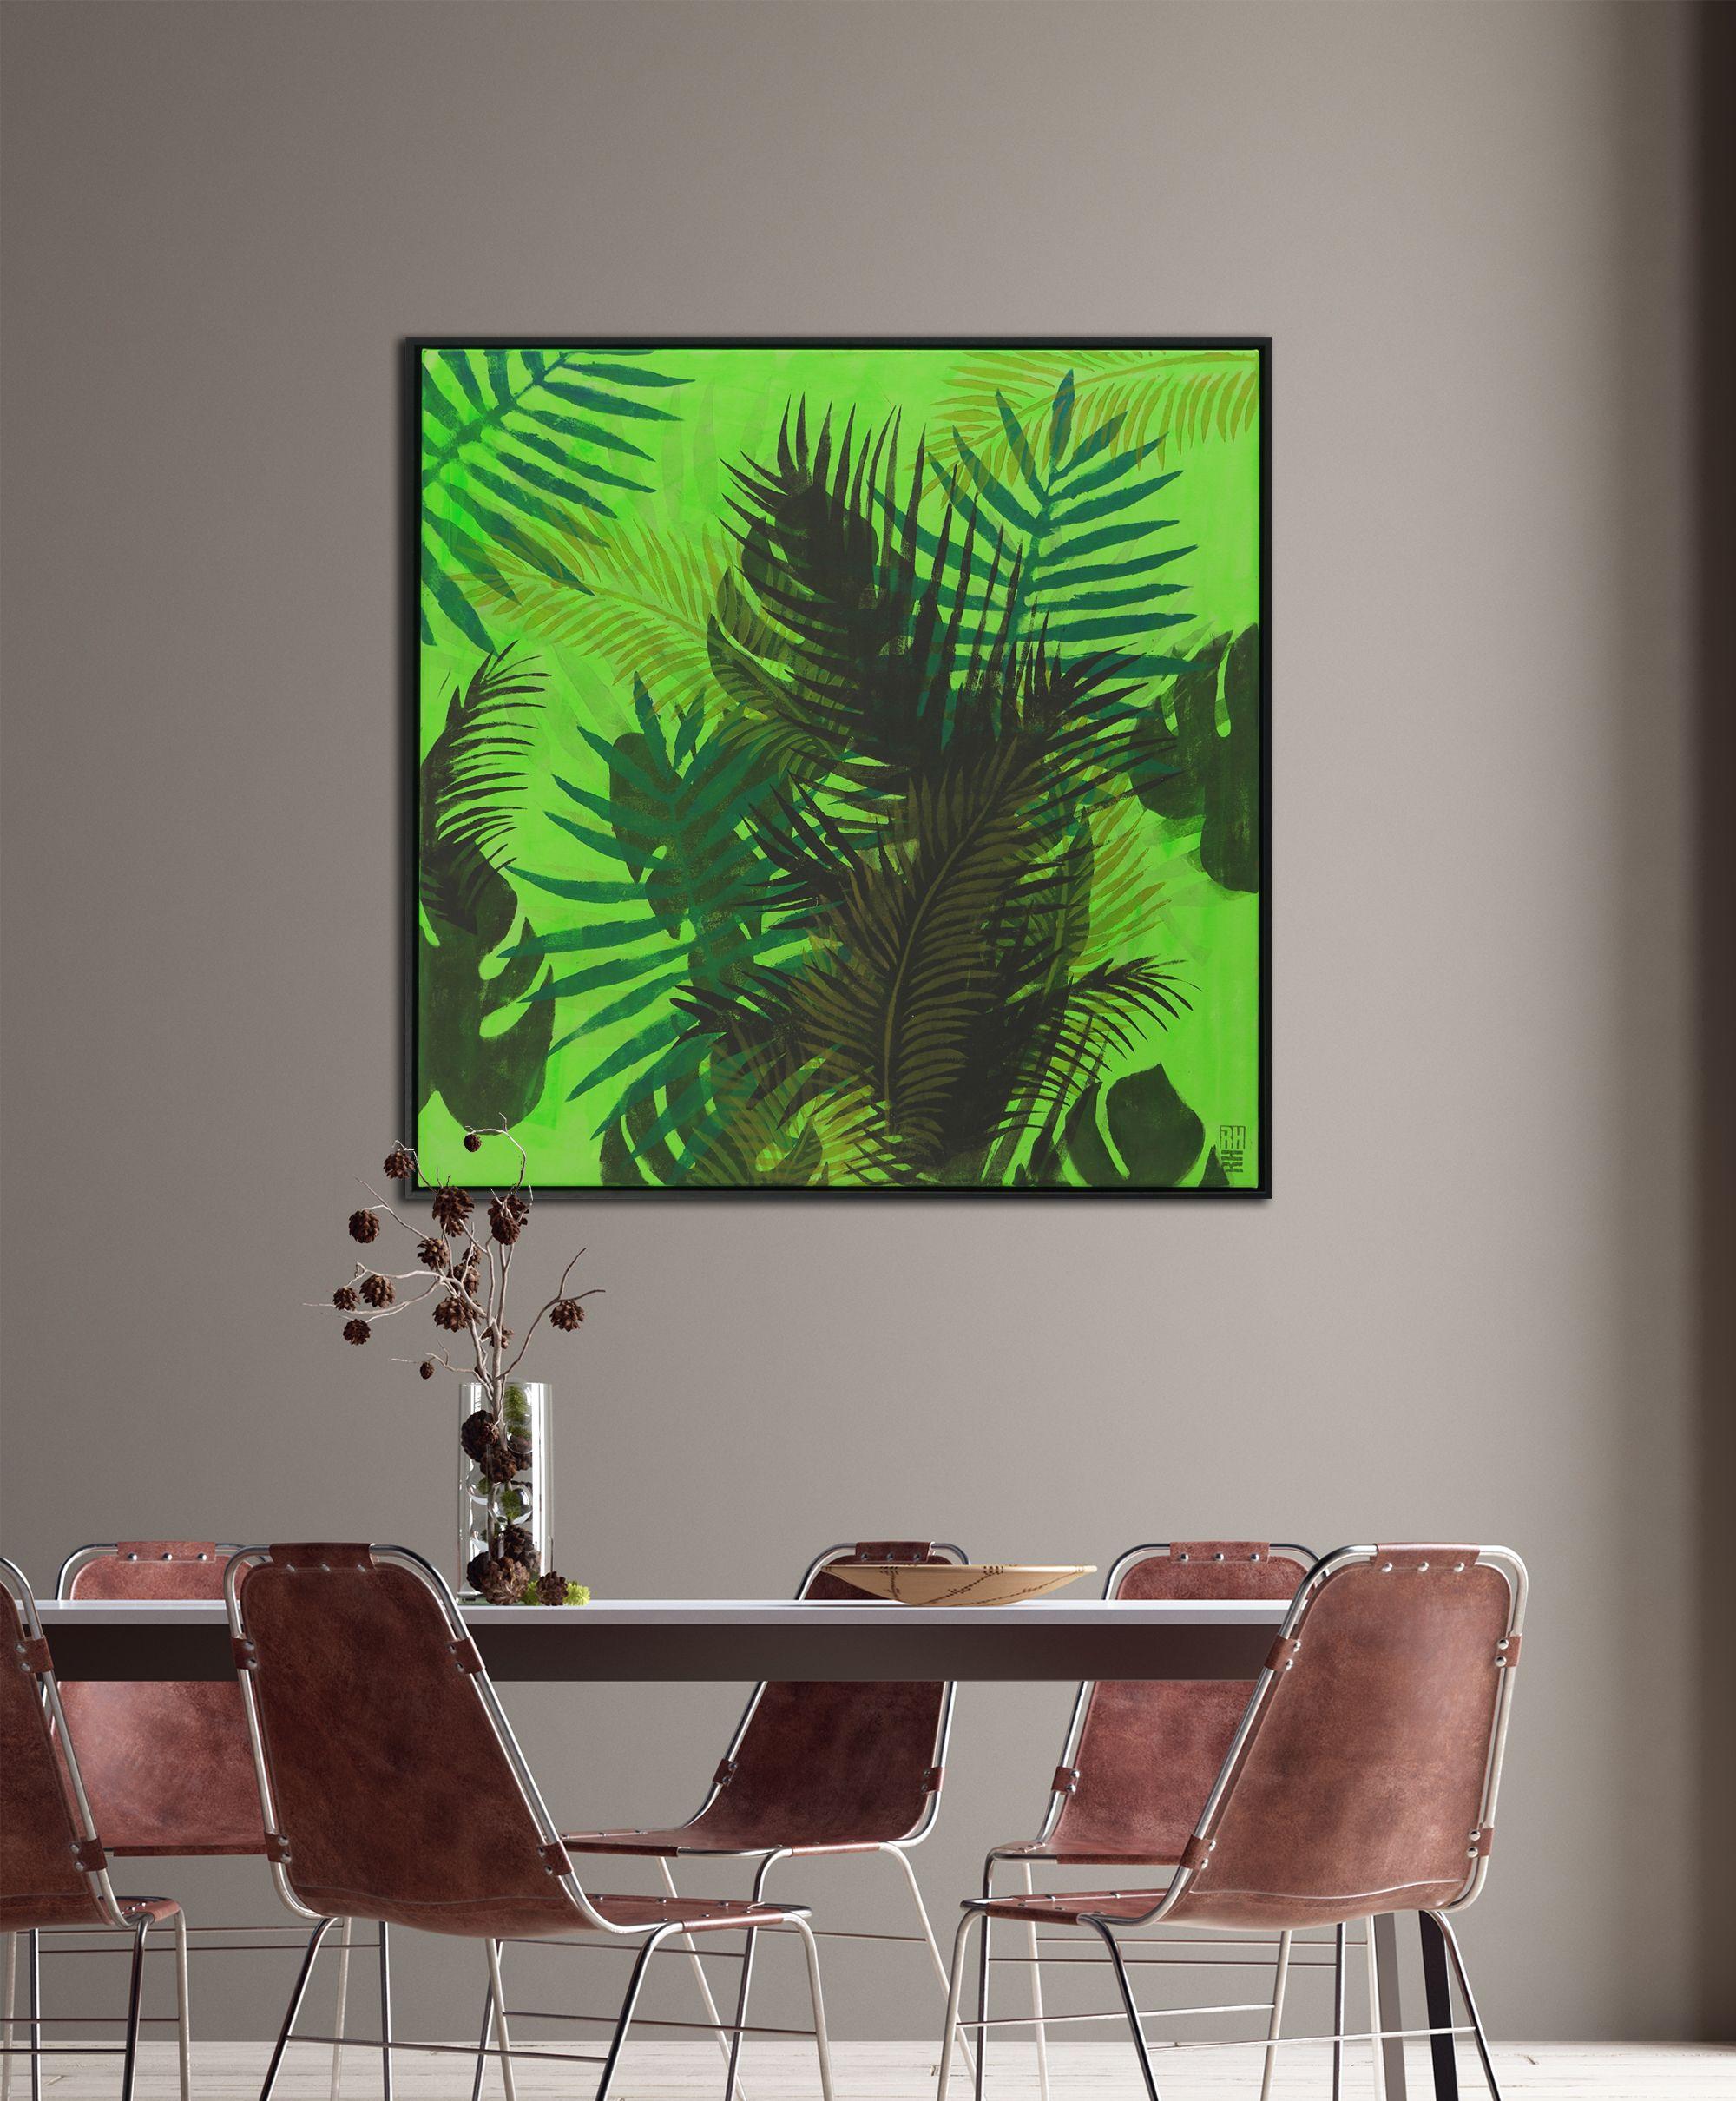 Forest in Green - Incl Frame, Painting, Acrylic on Canvas 1